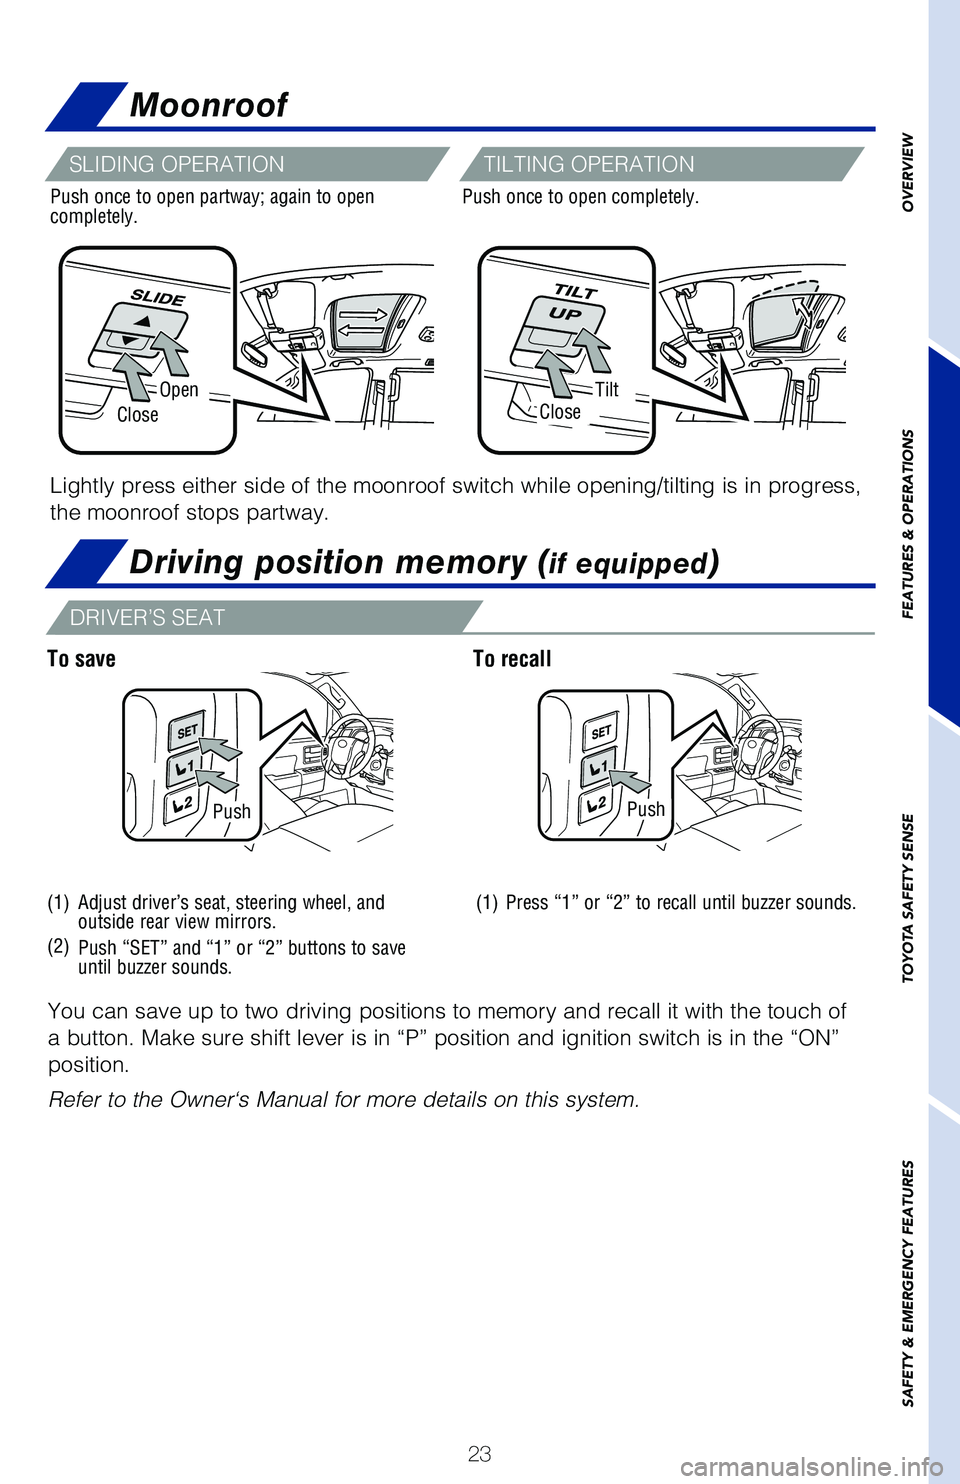 TOYOTA SEQUOIA 2020  Owners Manual (in English) 23
OpenTilt
CloseClose
PushPush
(1)
(2)
(1)
You can save up to two driving positions to memory and recall it with th\
e touch of 
a button. Make sure shift lever is in “P” position and ignition sw